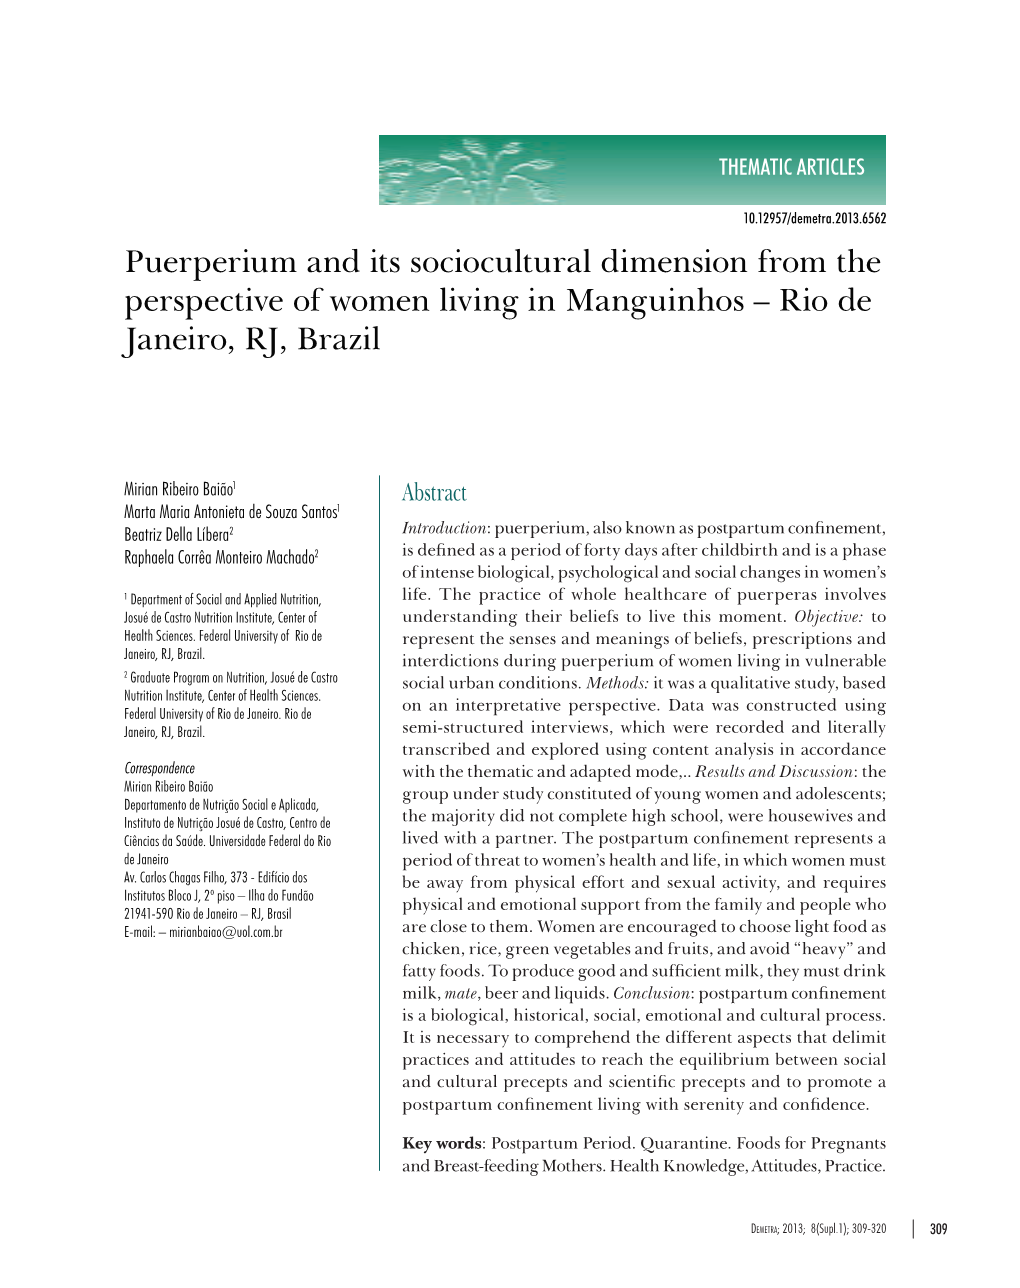 Puerperium and Its Sociocultural Dimension from the Perspective of Women Living in Manguinhos – Rio De Janeiro, RJ, Brazil